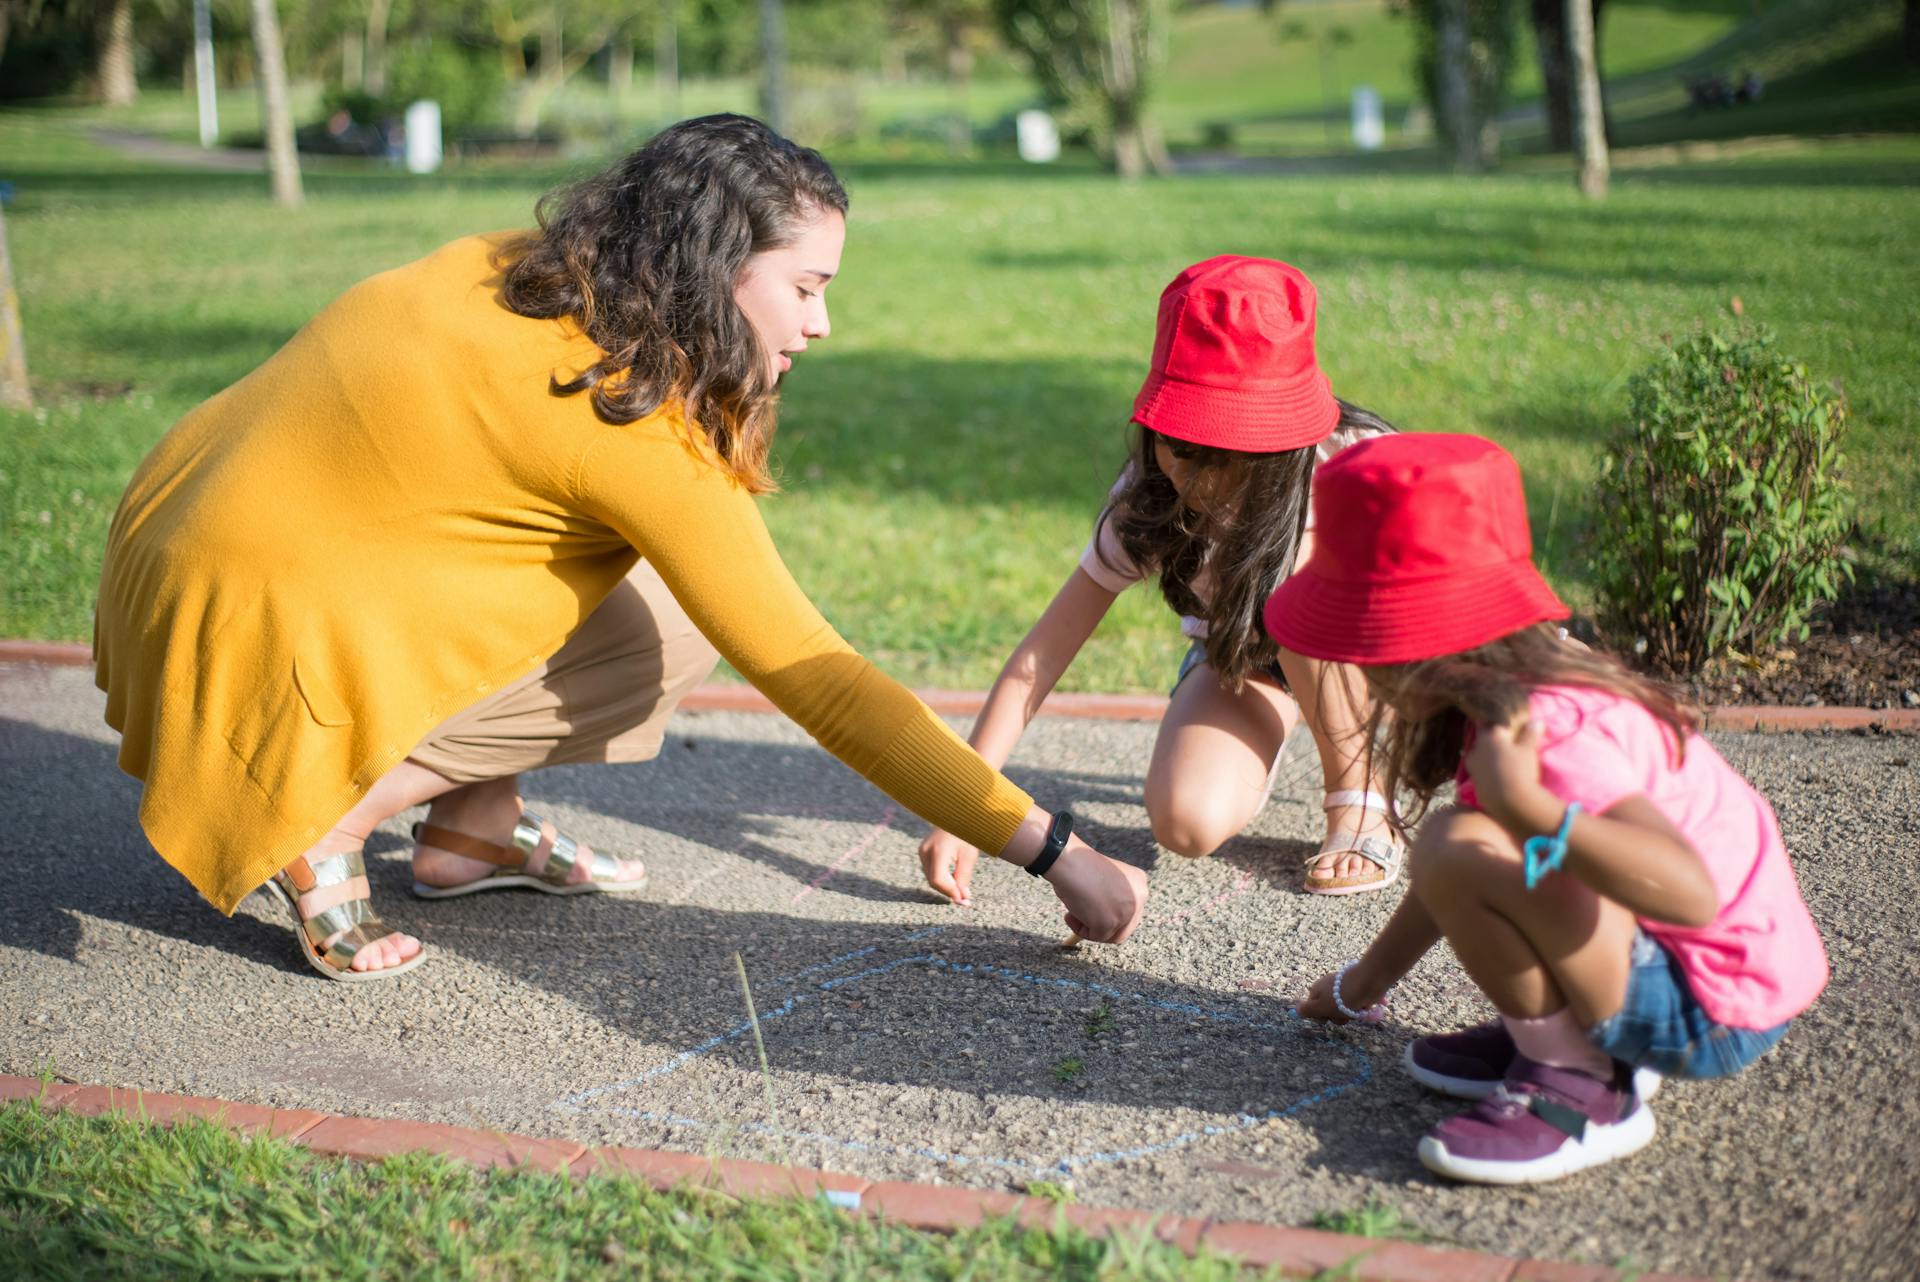 A woman playing with kids in a park | Source: Pexels